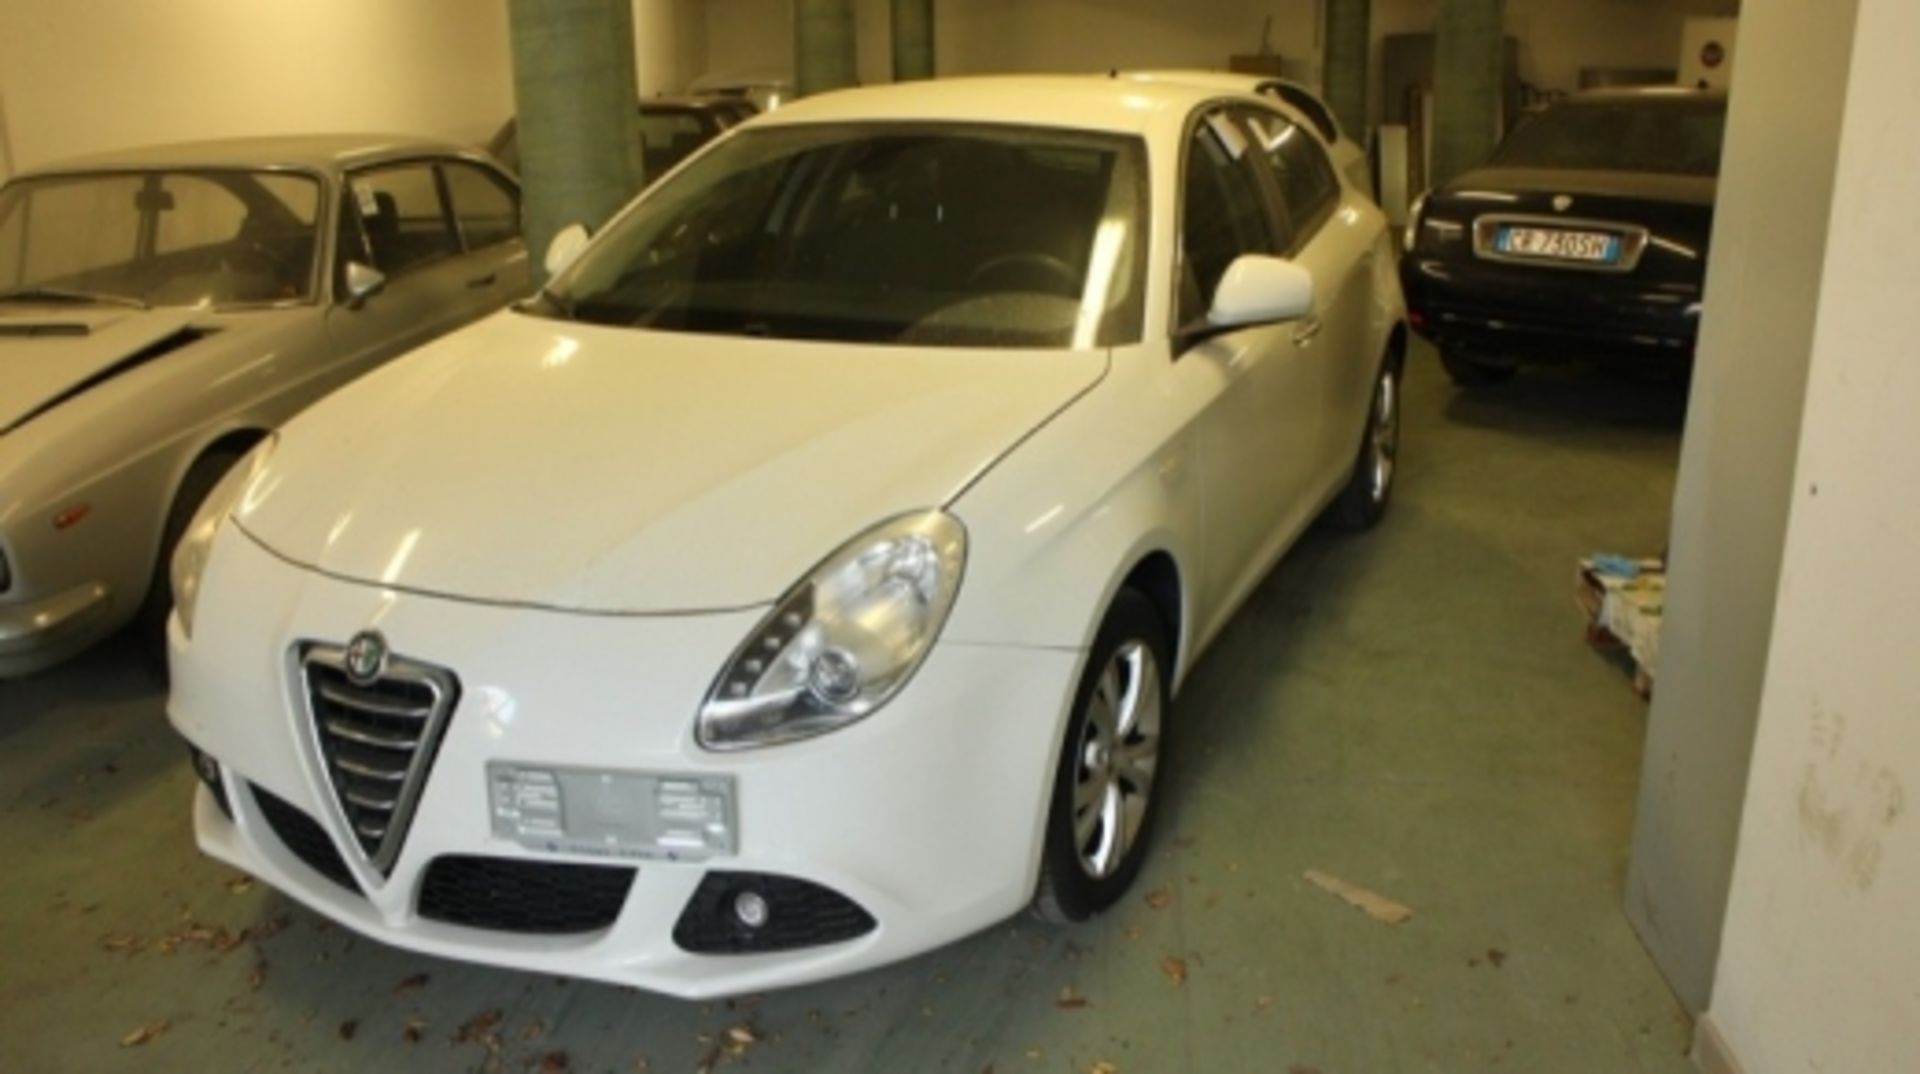 1,Giulietta Alfa Romeo car plate n.  8984HLK diesel, about  50.000/60.000 km. without keys Click